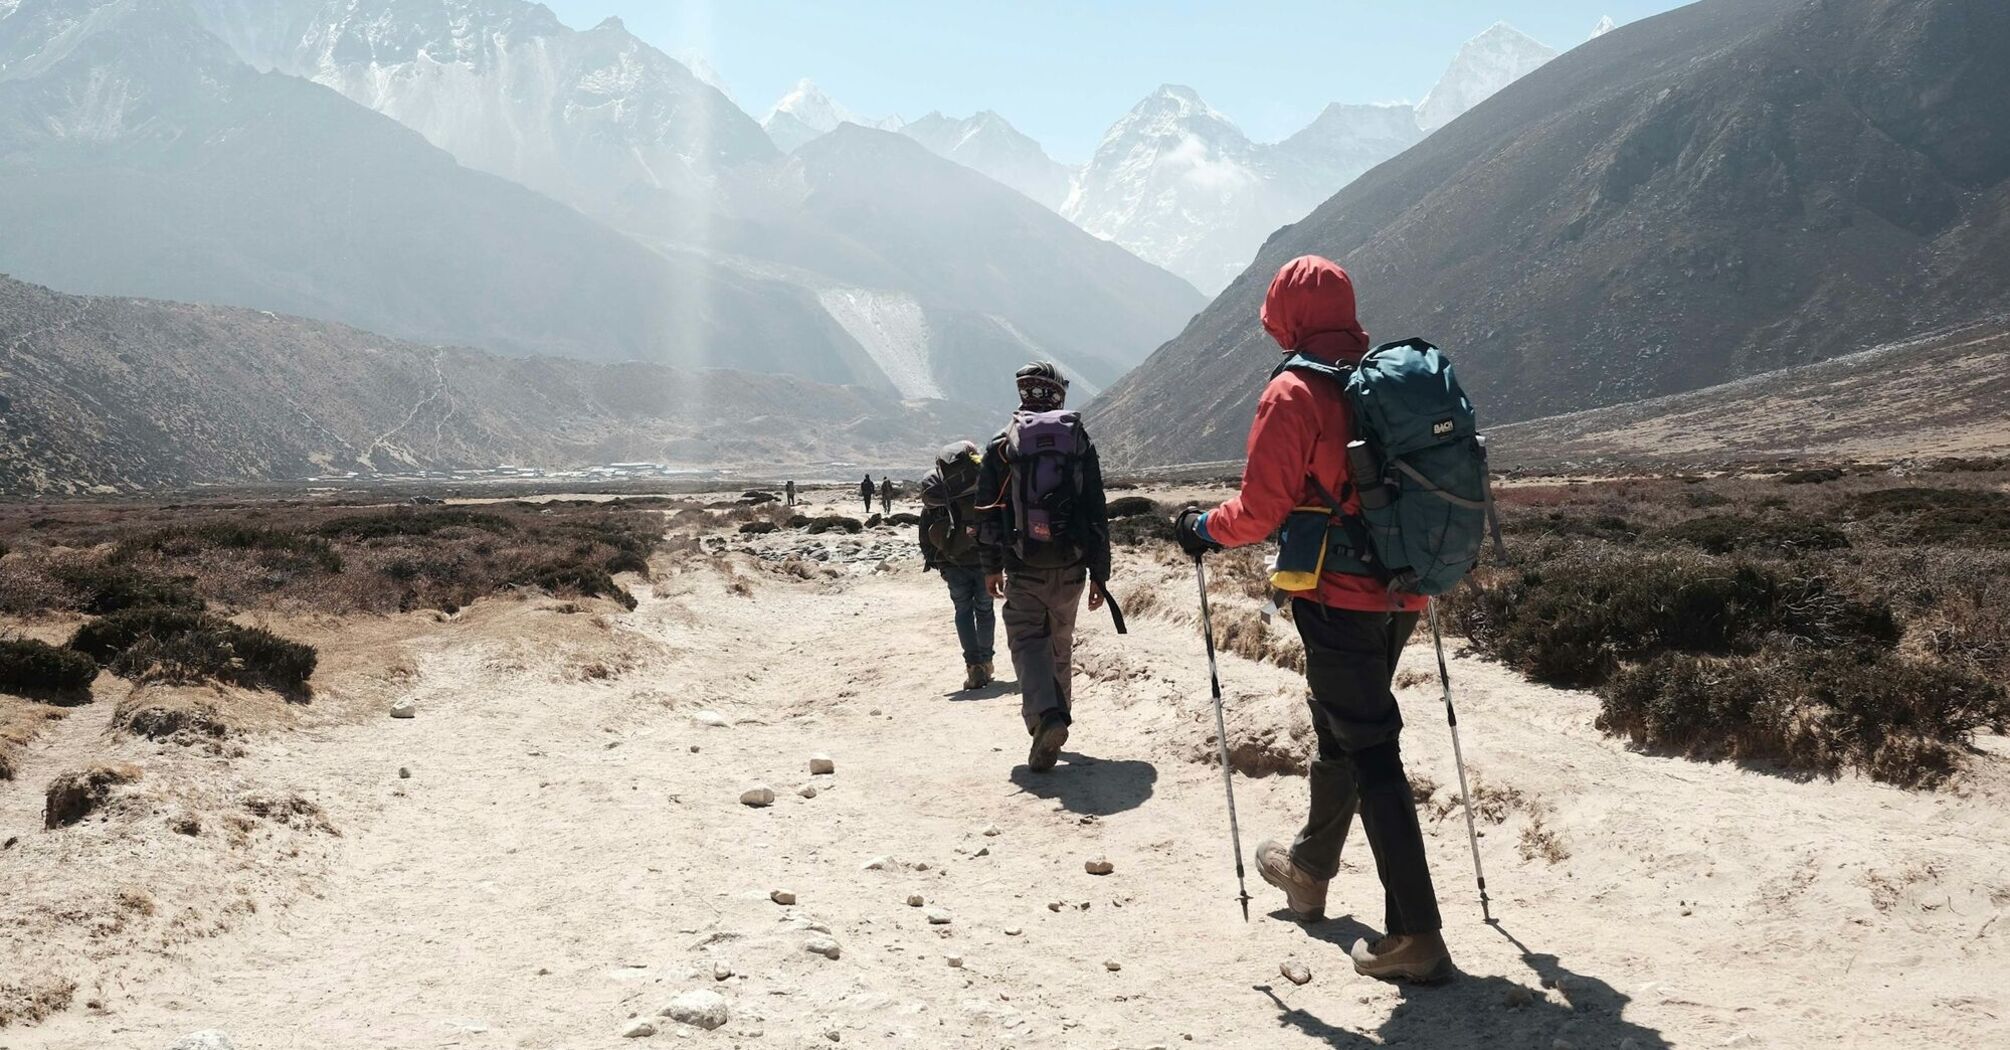 Group of climbers trekking through a valley towards Everest with mountains in the background 